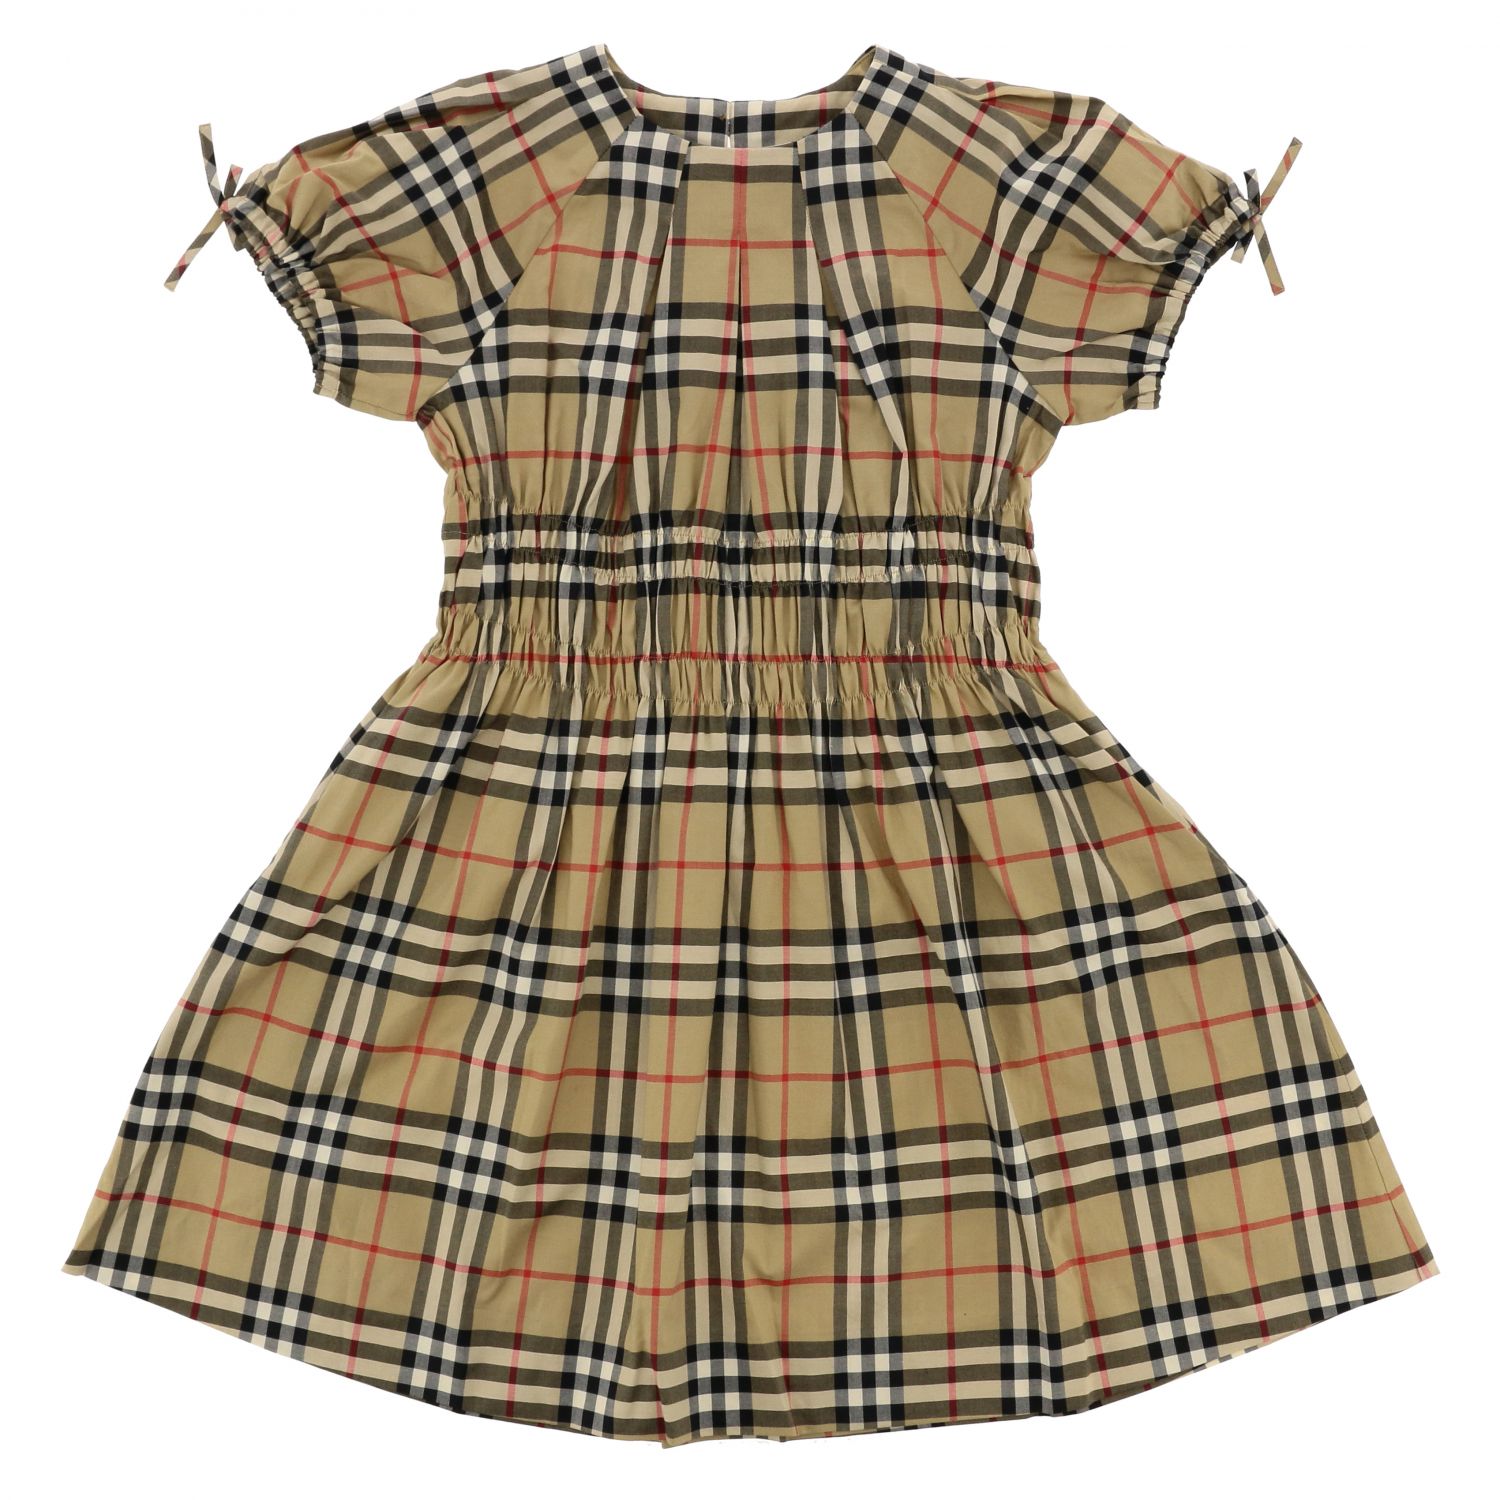 BURBERRY: cotton dress with check pattern - Beige | Burberry dress ...